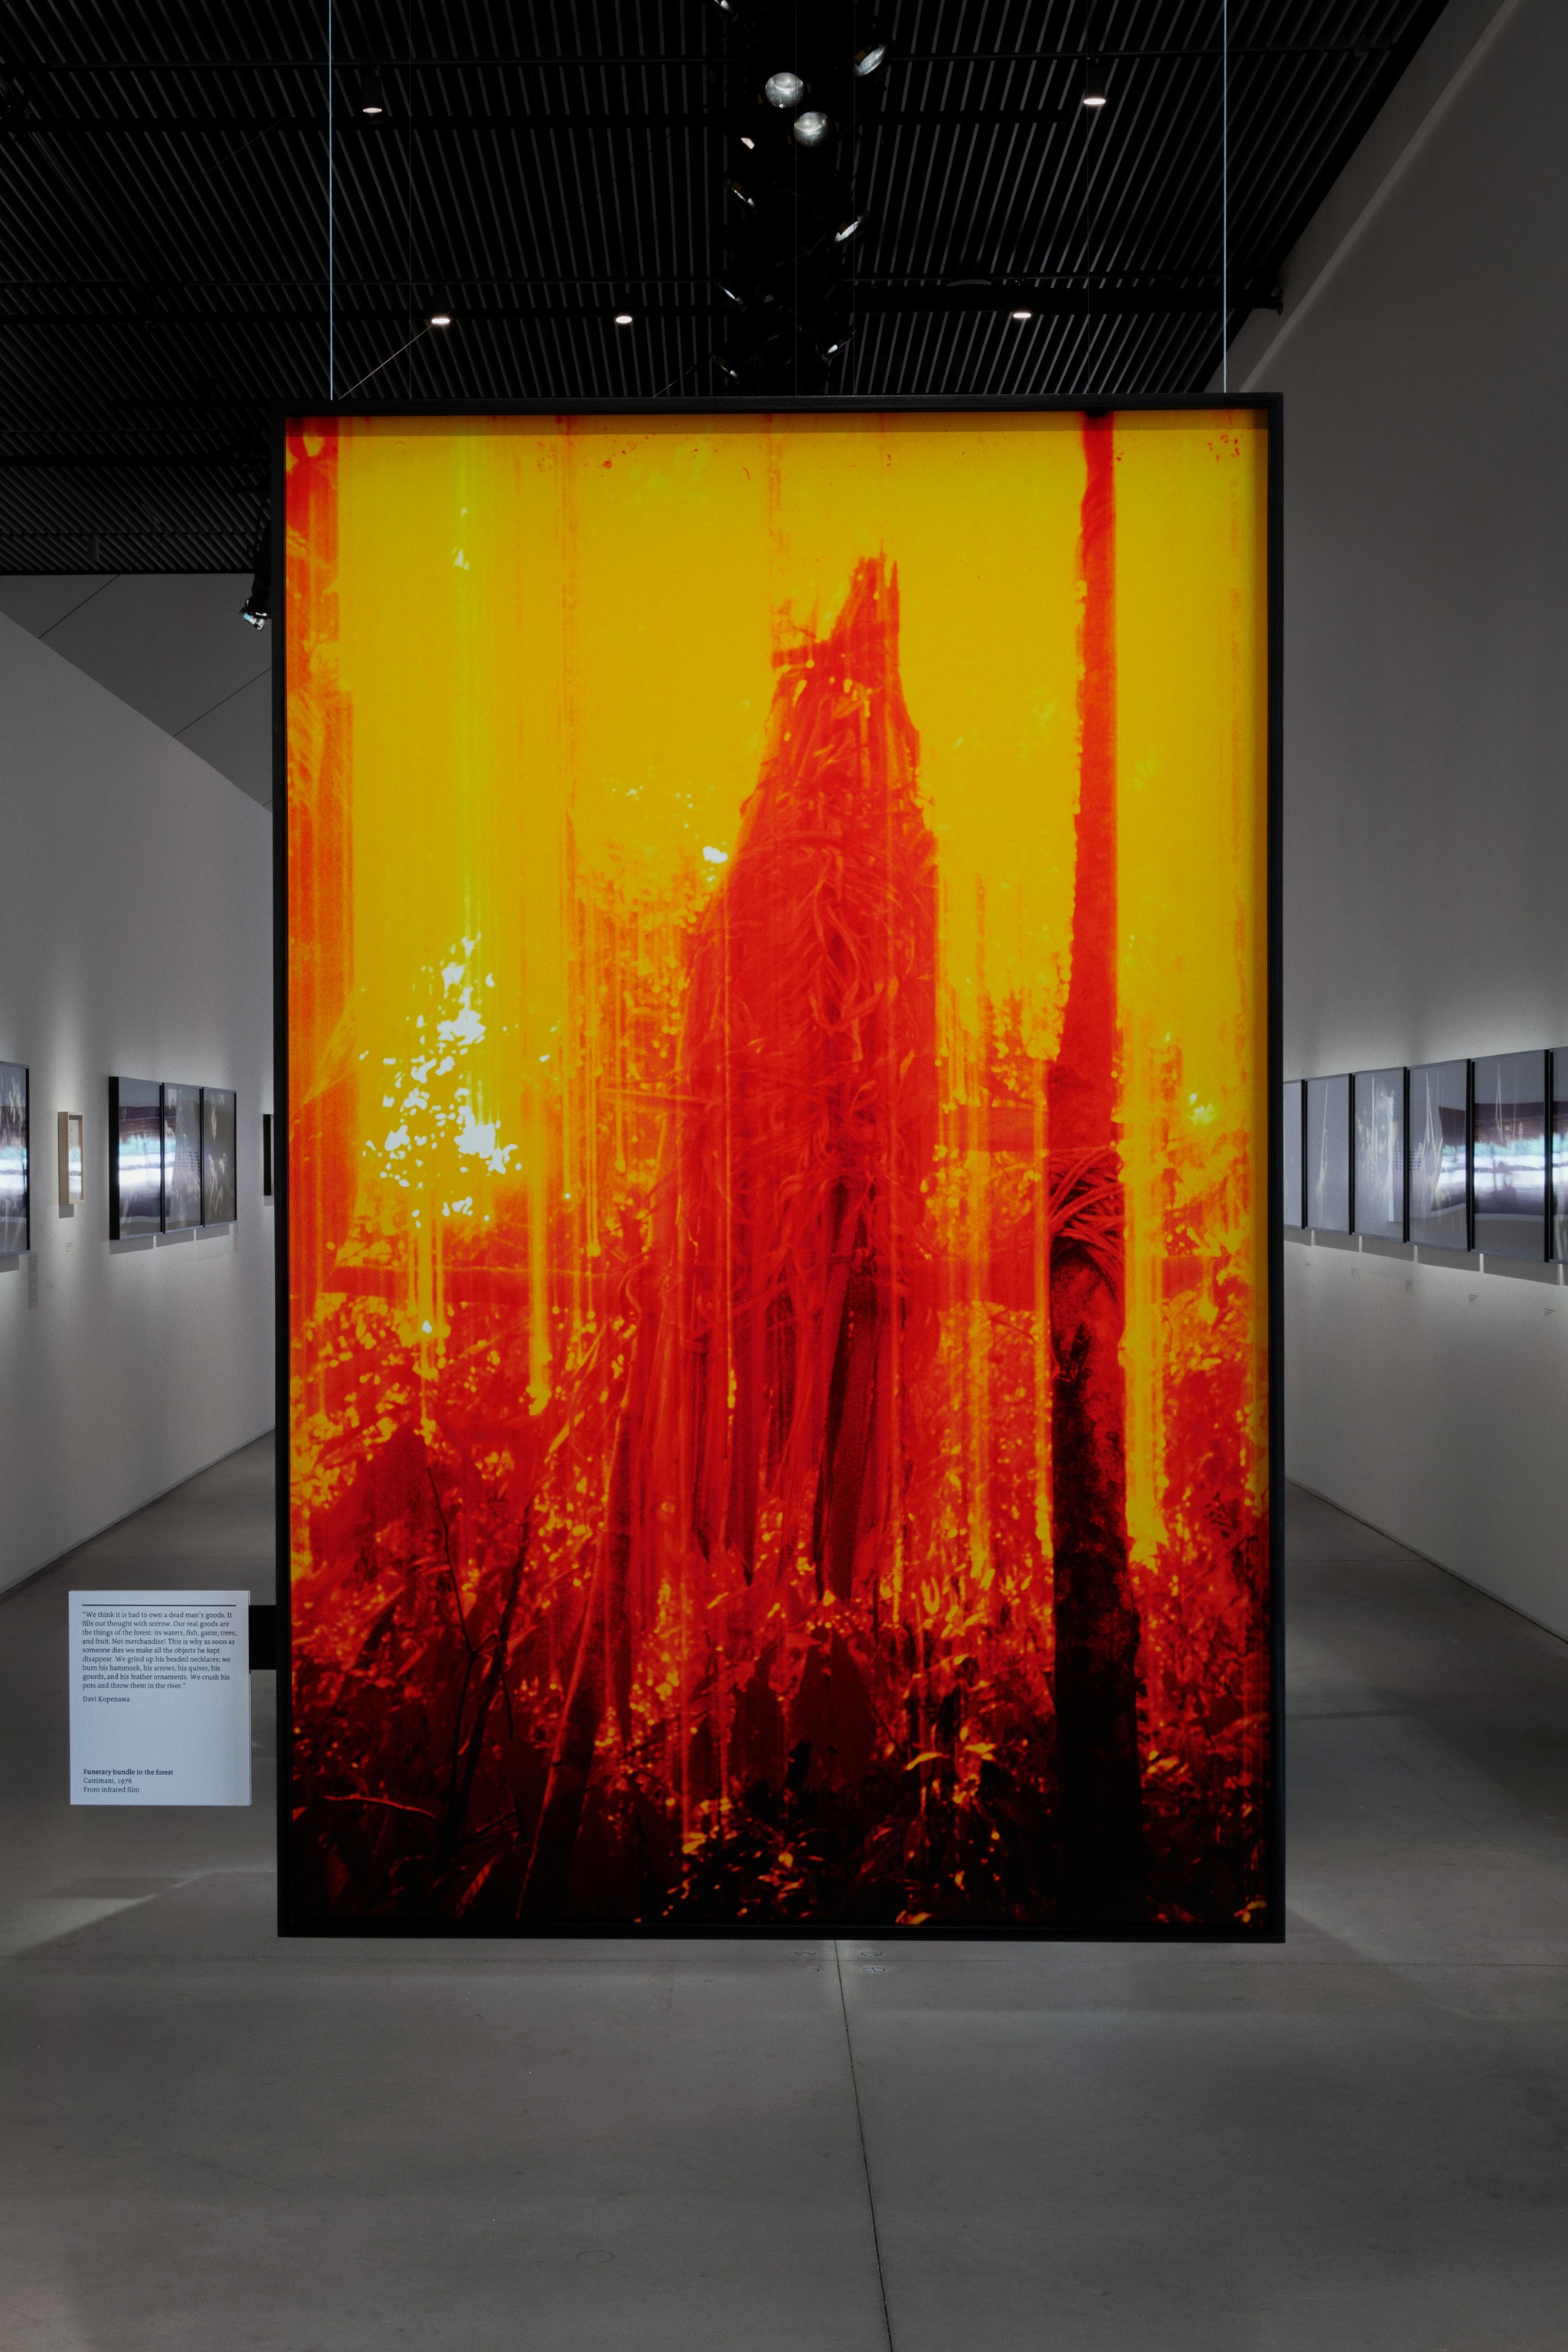 A photo suspended from the ceiling of an art gallery. The image is cast in a red-orange tone and shows a funerary bundle among trees in a forest.